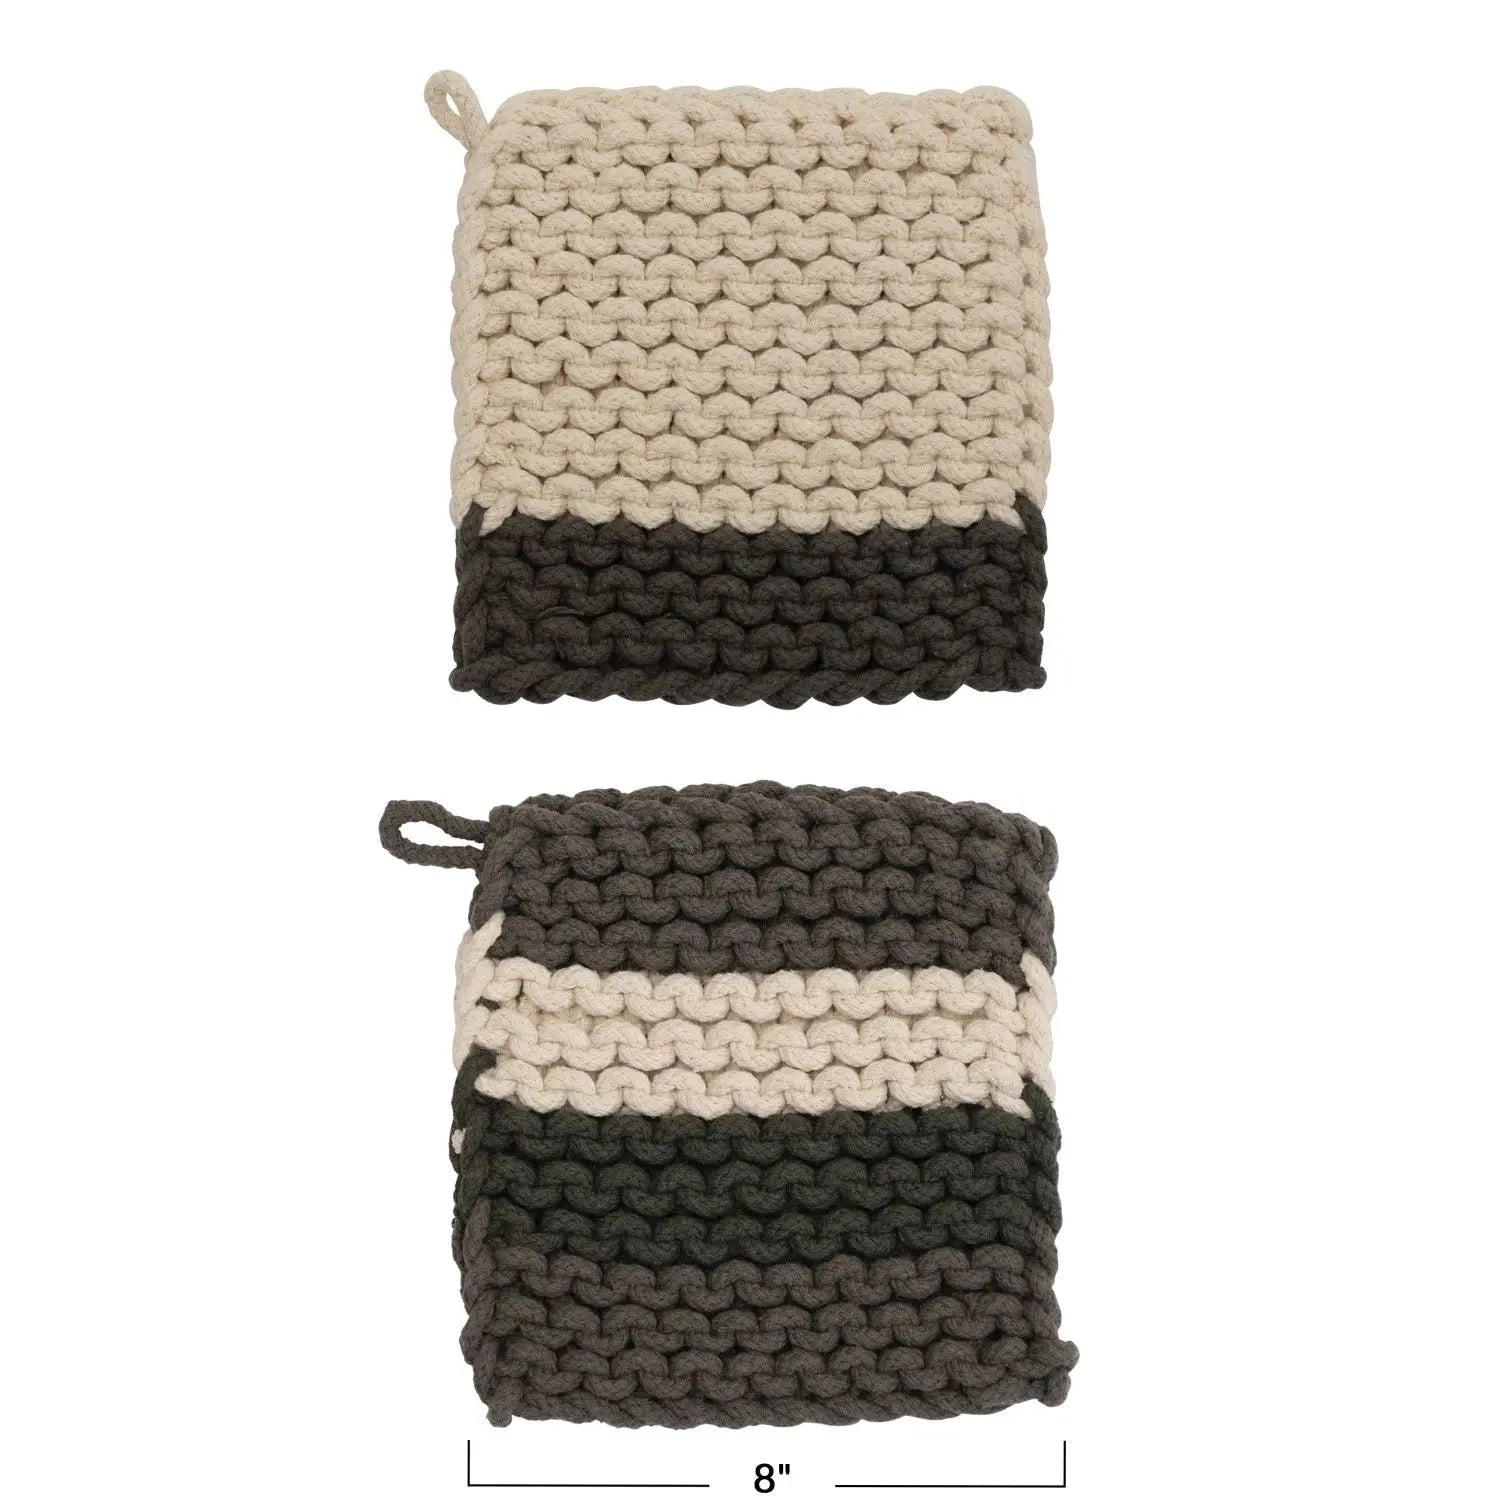 Crocheted Cotton Pot Holder - 8" Square CREATIVE CO-OP